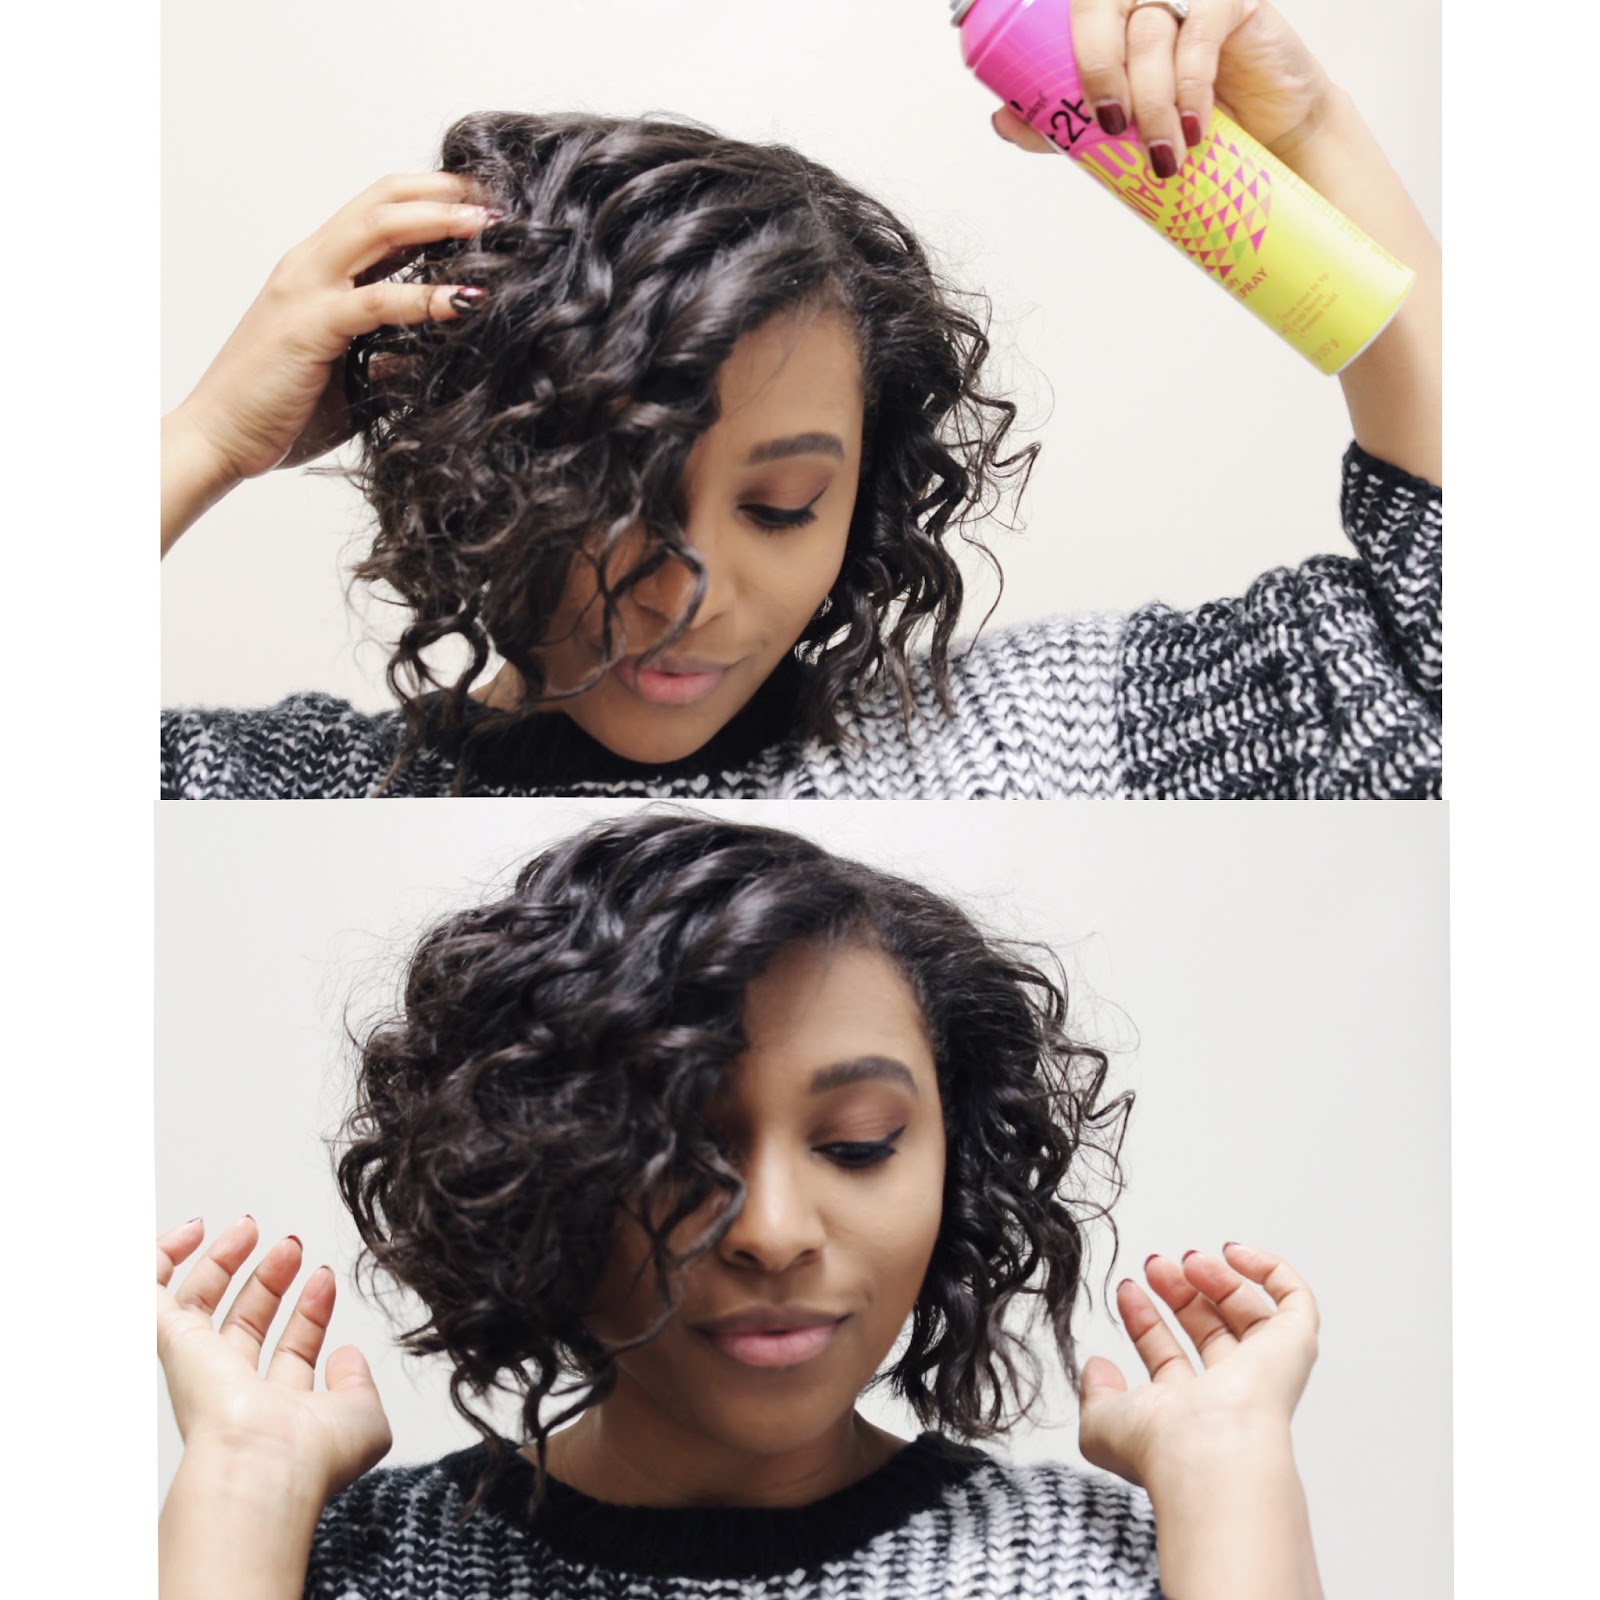 Got2b hair products, how to get curls, how to curl hair with a bob, bob haircut, schwarzkopf, hair products for volume, volumaniac, hair tutorials, how to use a curling wand